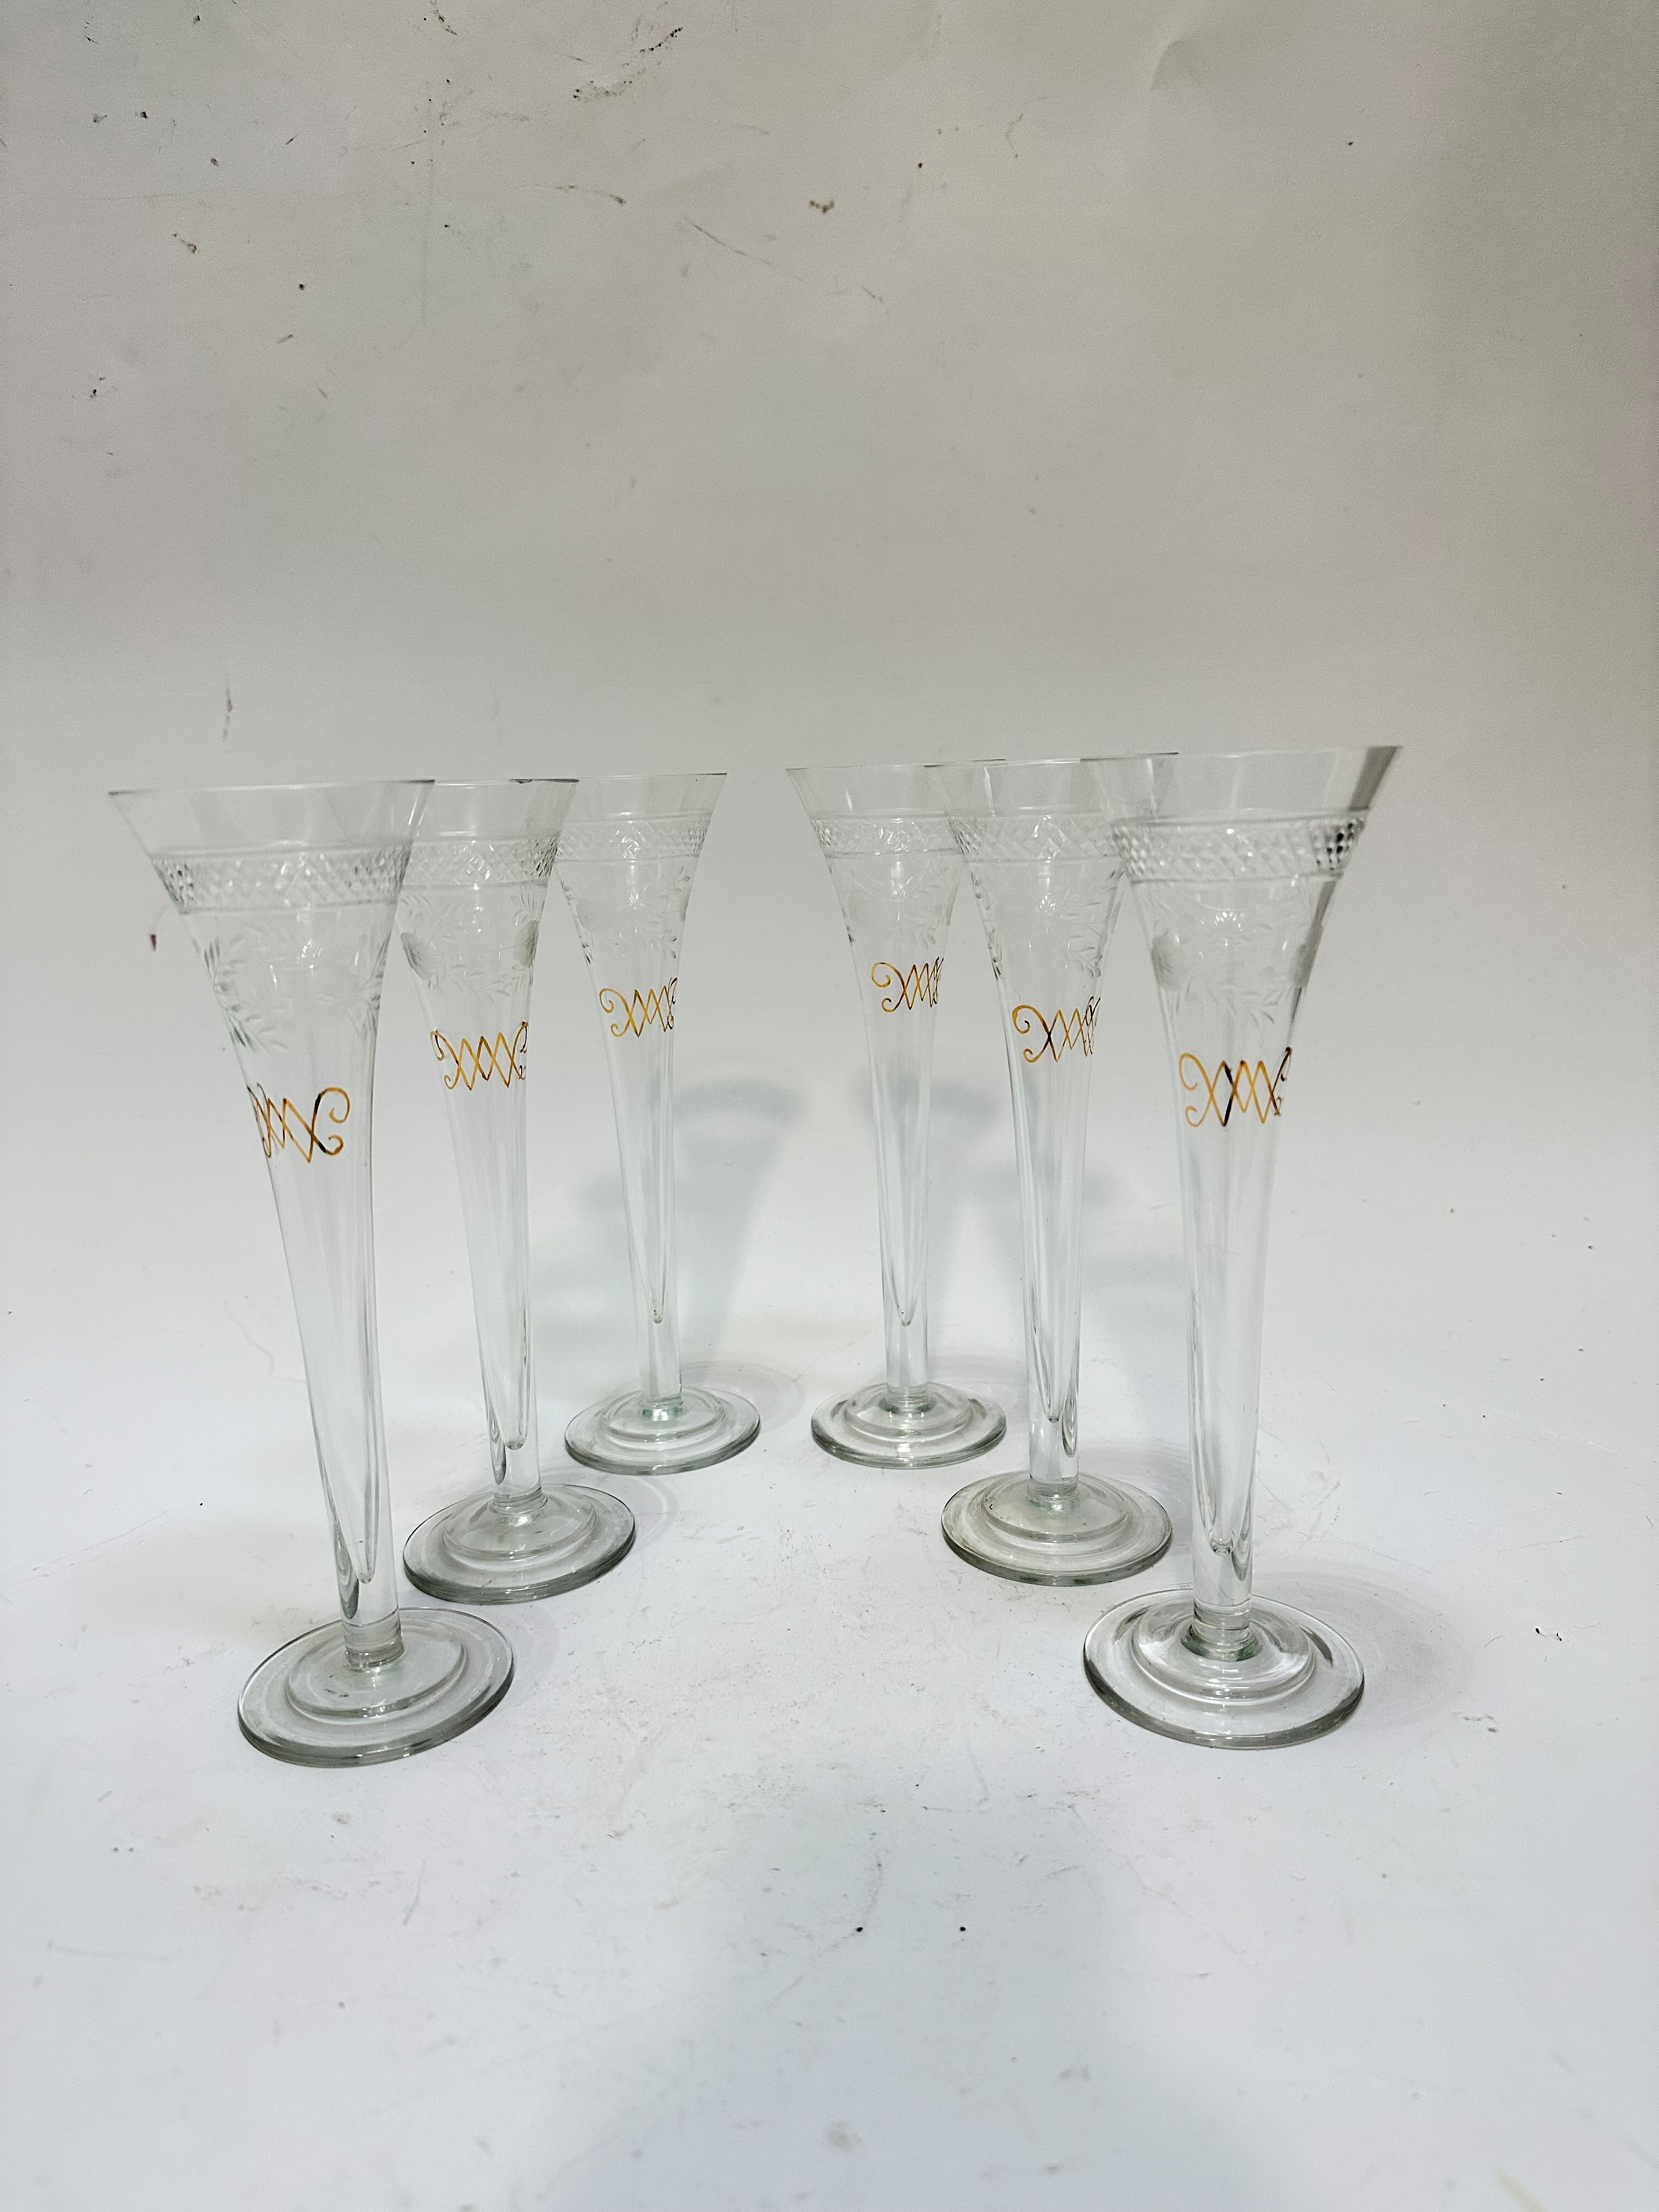 A set of six Edwardian style engraved champagne flutes with gilded decoration, (23cm x 7cm) show